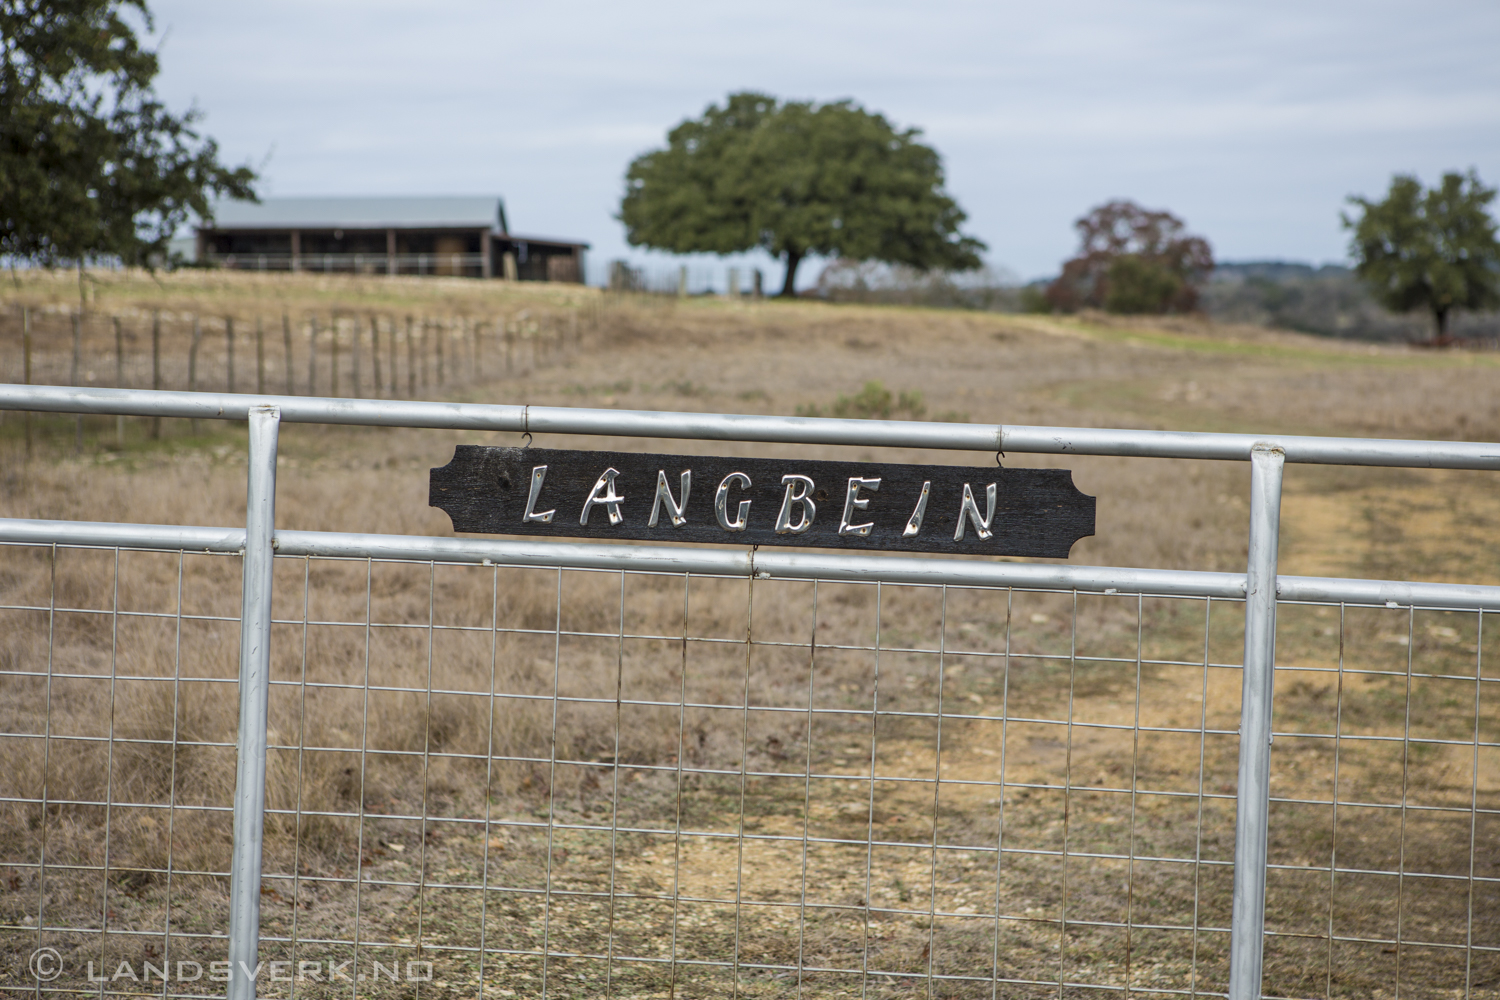 Only understood by Norwegians I guess. Texas Hill Country. 

(Canon EOS 5D Mark III / Canon EF 24-70mm f/2.8 L USM